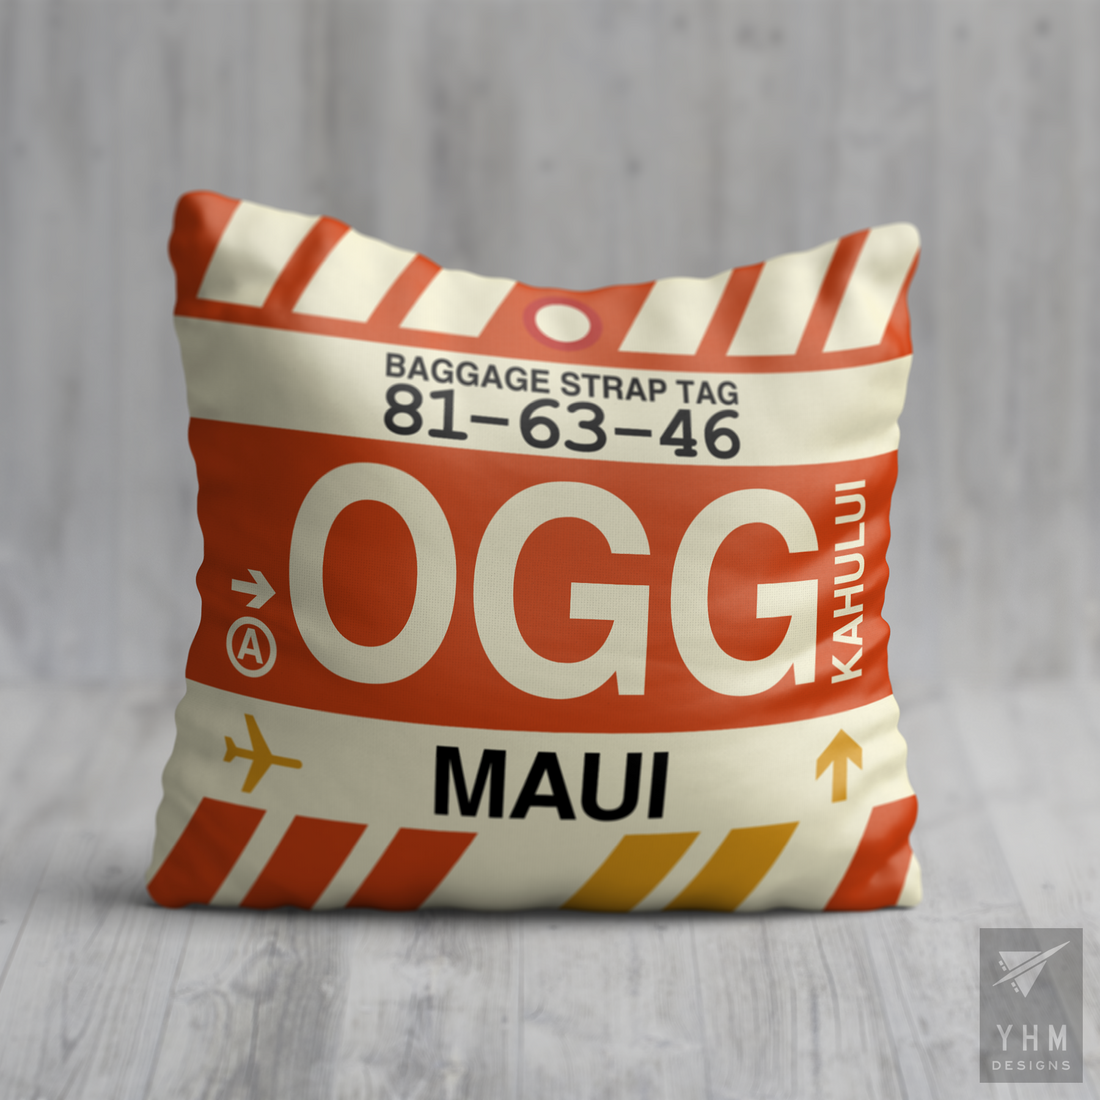 Maui Gift Ideas • Wall Art & Home Decor Featuring the OGG Airport Code